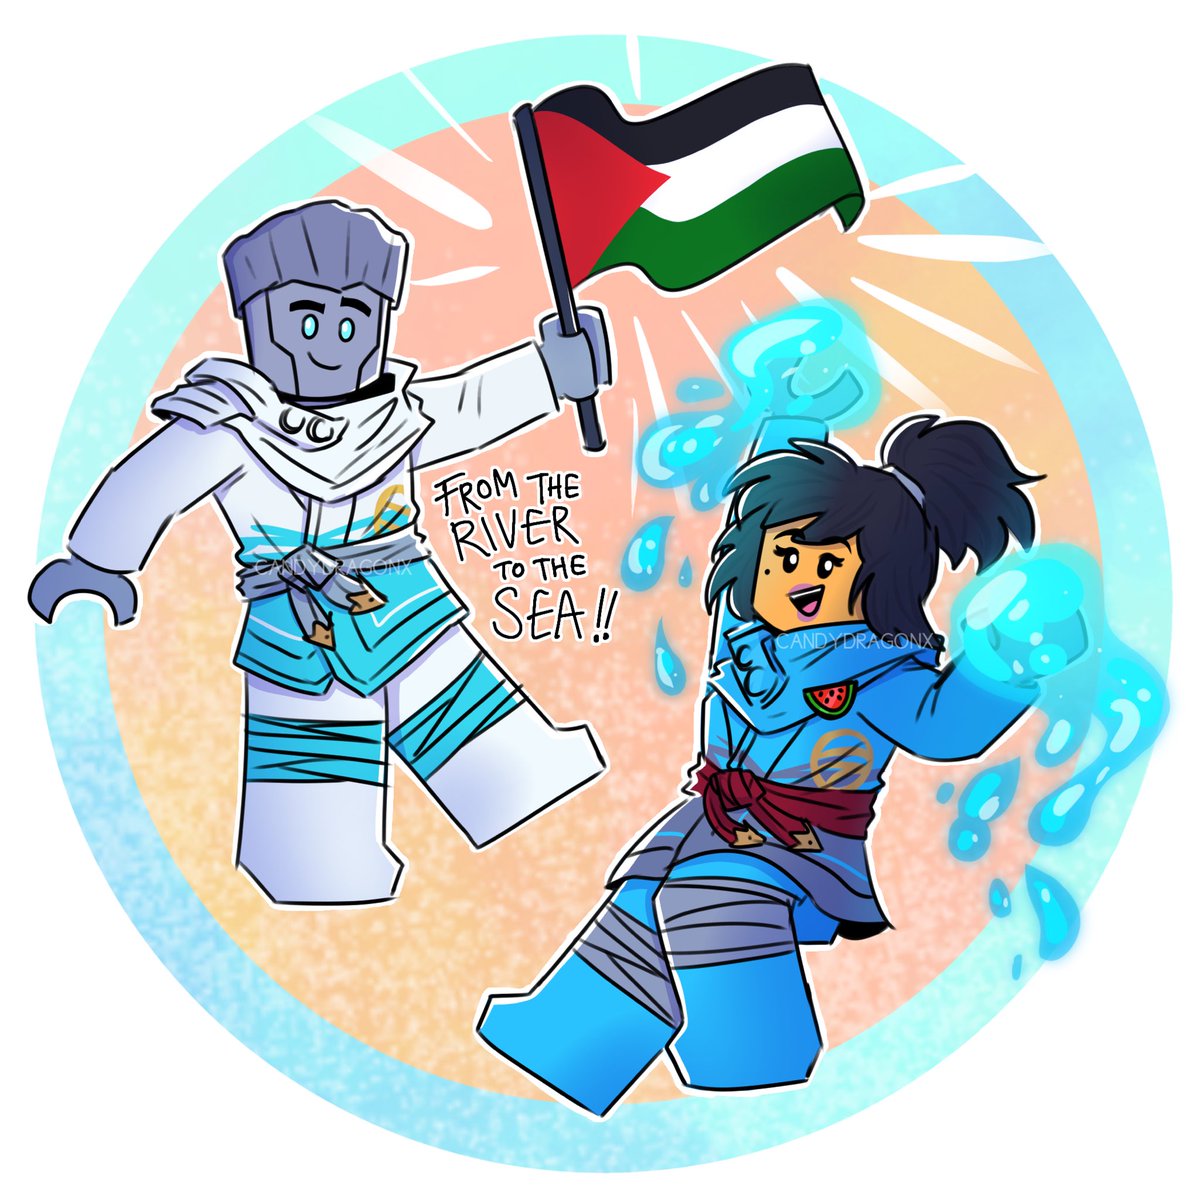 remember to keep boycotting, and keep using your voice! #FreePalestine #CeasefireNOW 🍉 - daily click: arab.org - donations for women’s hygiene kits: piousprojects.org/campaign/2712 - e-sims: gazaesims.com - CareForGaza: gofundme.com/f/CareForGaza